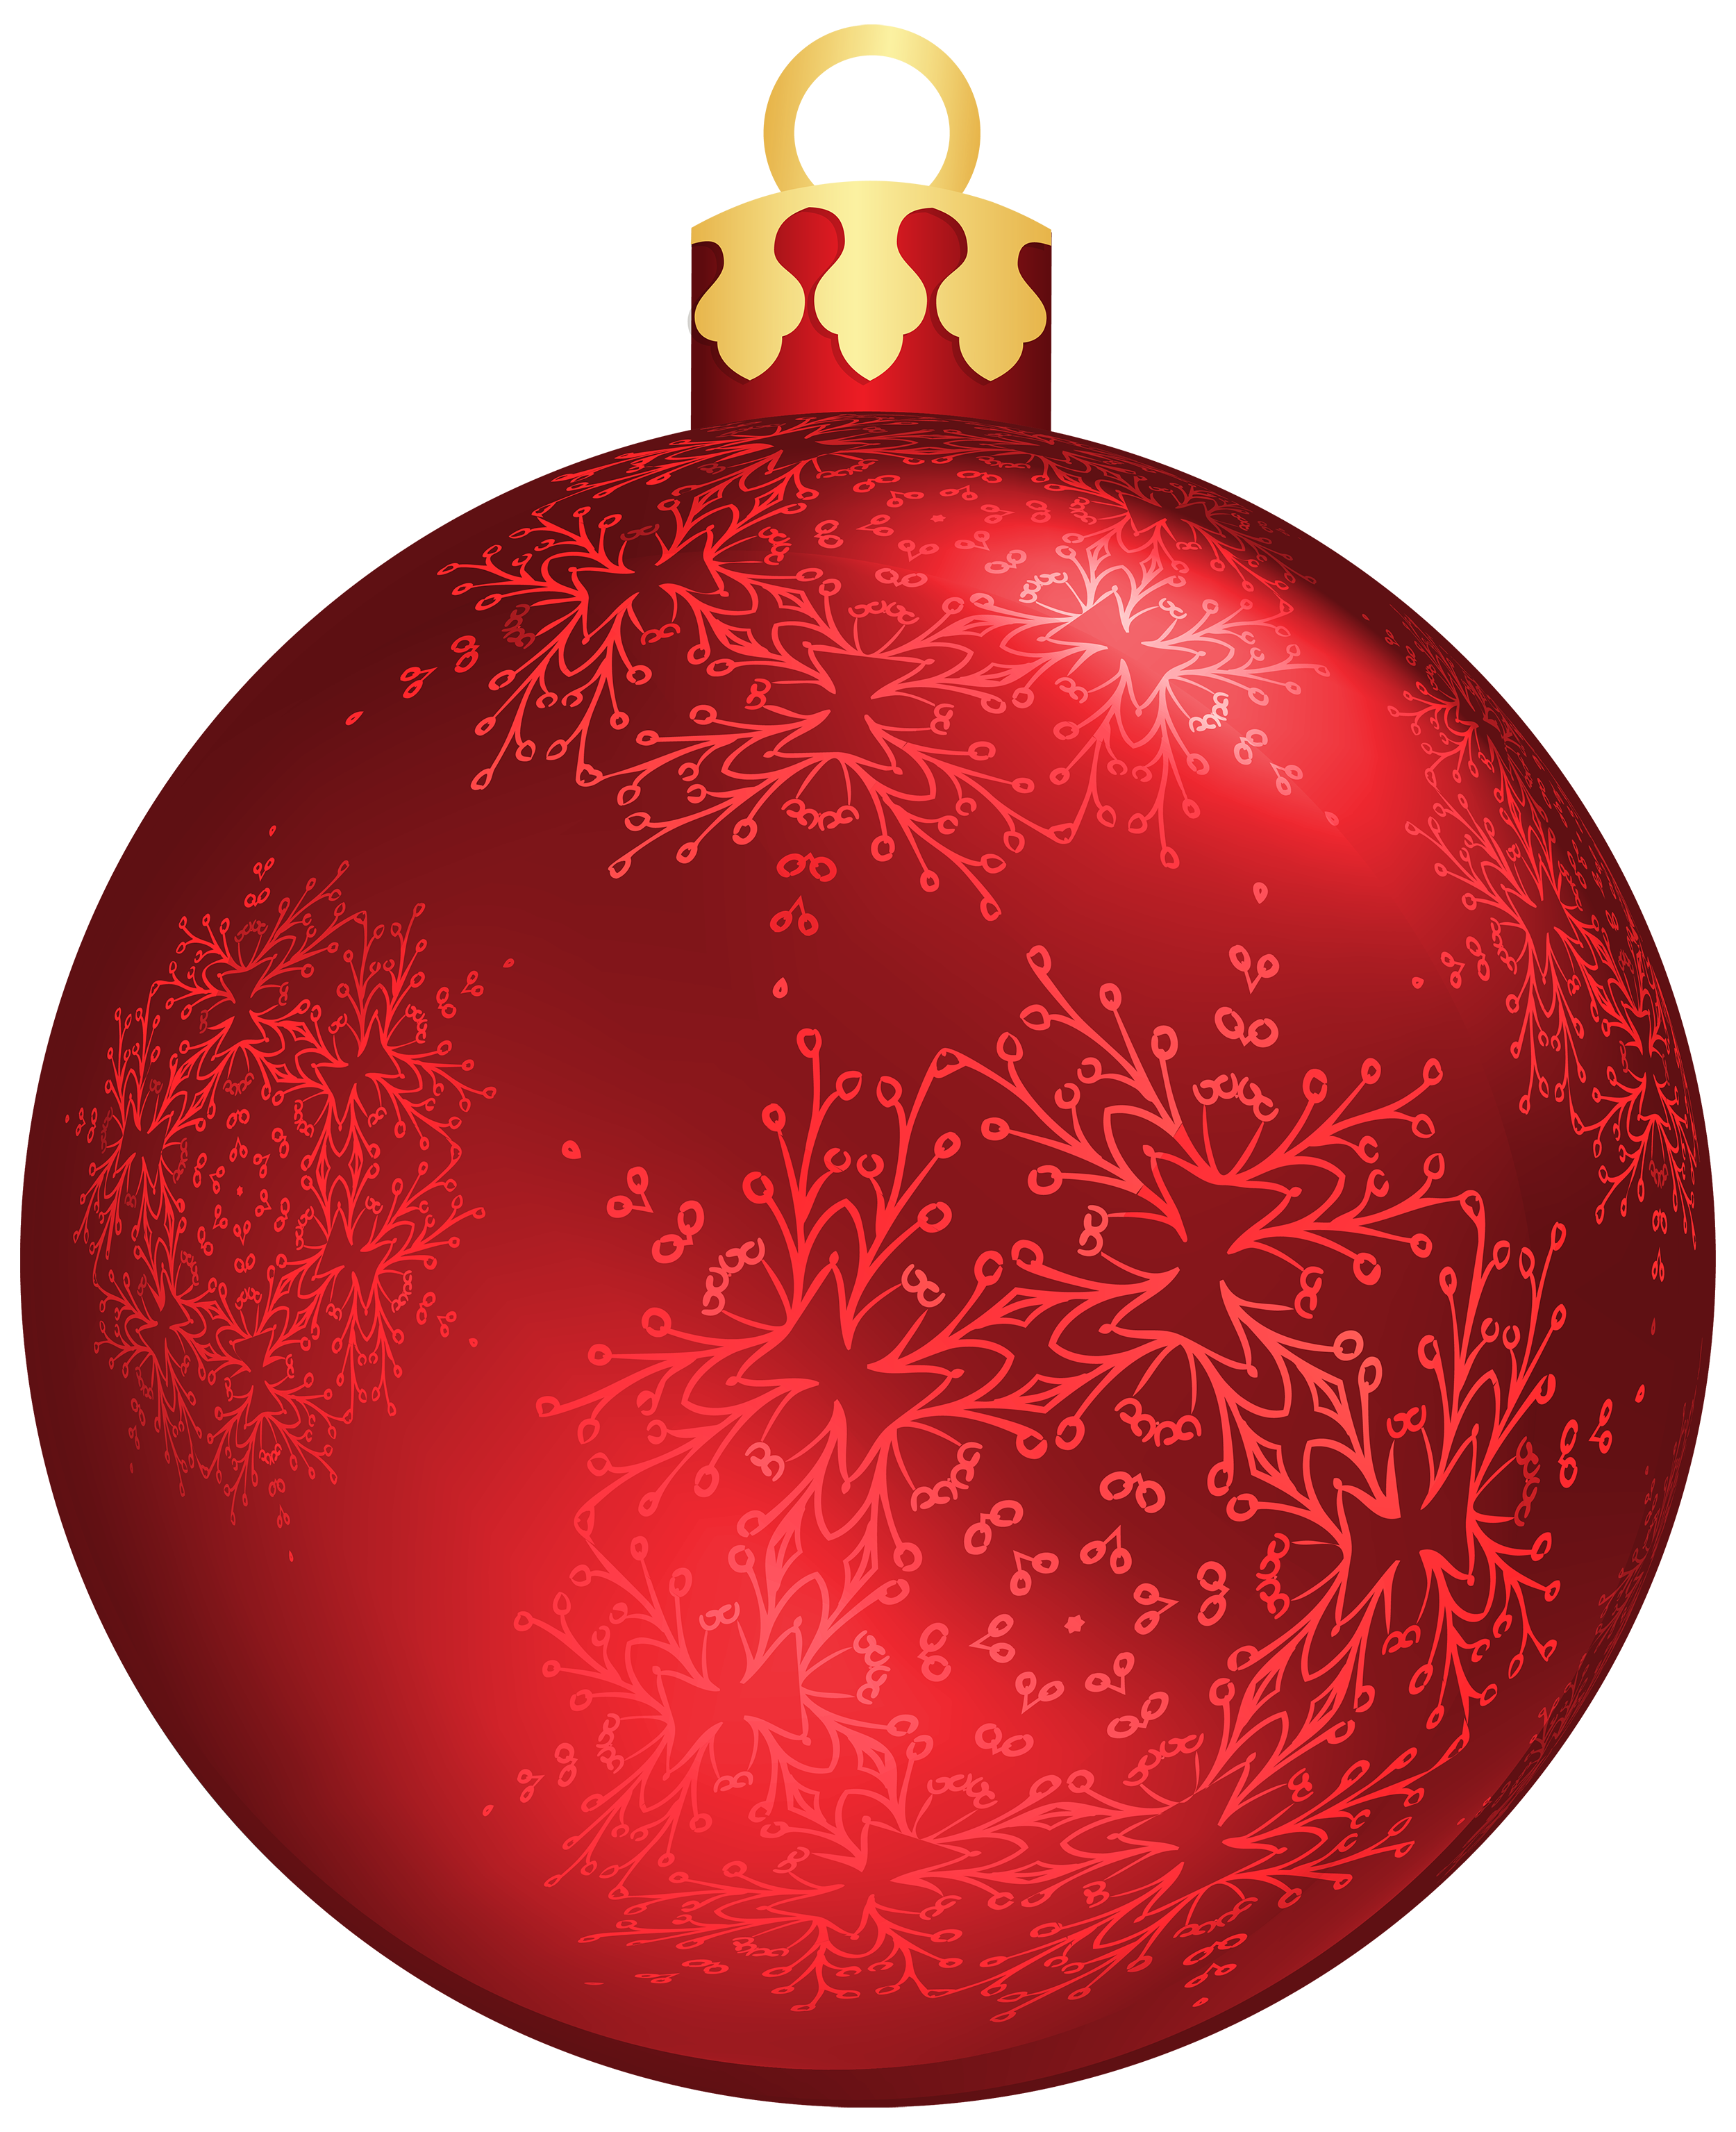 Red Christmas Balls PNG Transparent Background, Free Download #35227 - FreeIconsPNG